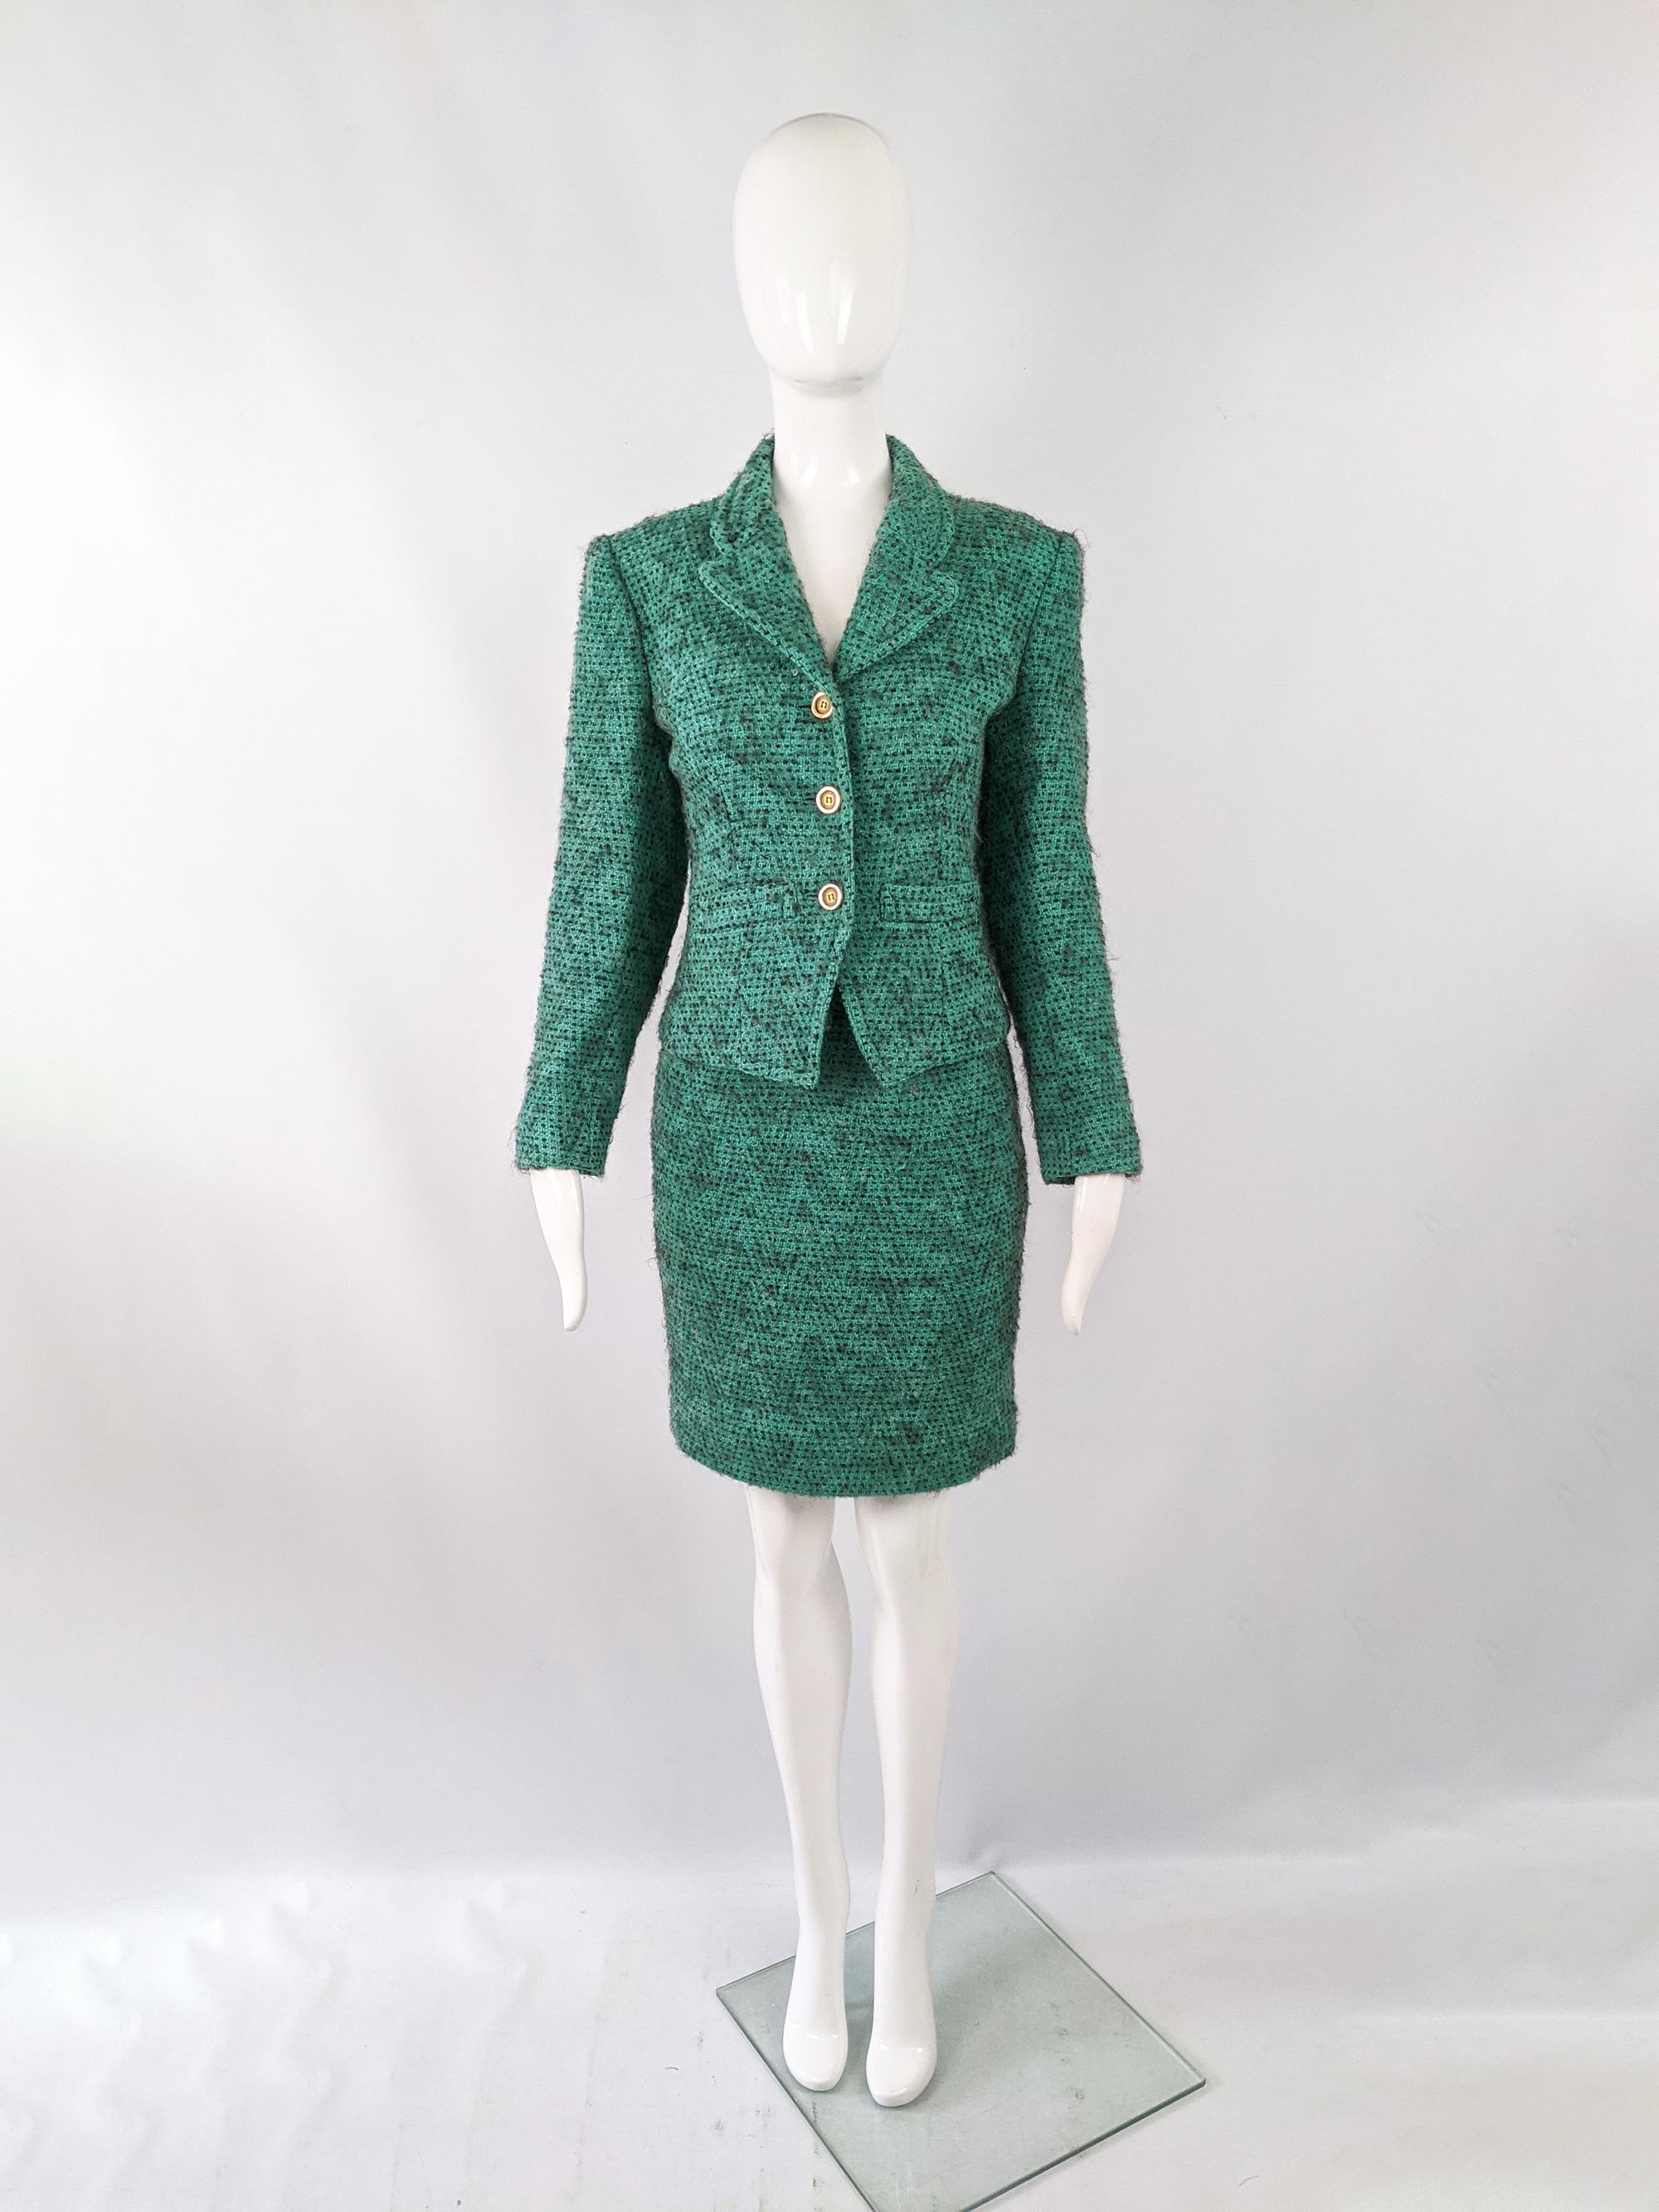 A chic vintage womens two piece skirt suit from the 80s by luxury French fashion designer, Guy Laroche. In a green fuzzy wool boucle tweed with a sharp, tailored look and statement buttons.  

Size: Marked vintage FR 34 but measures roughly like a